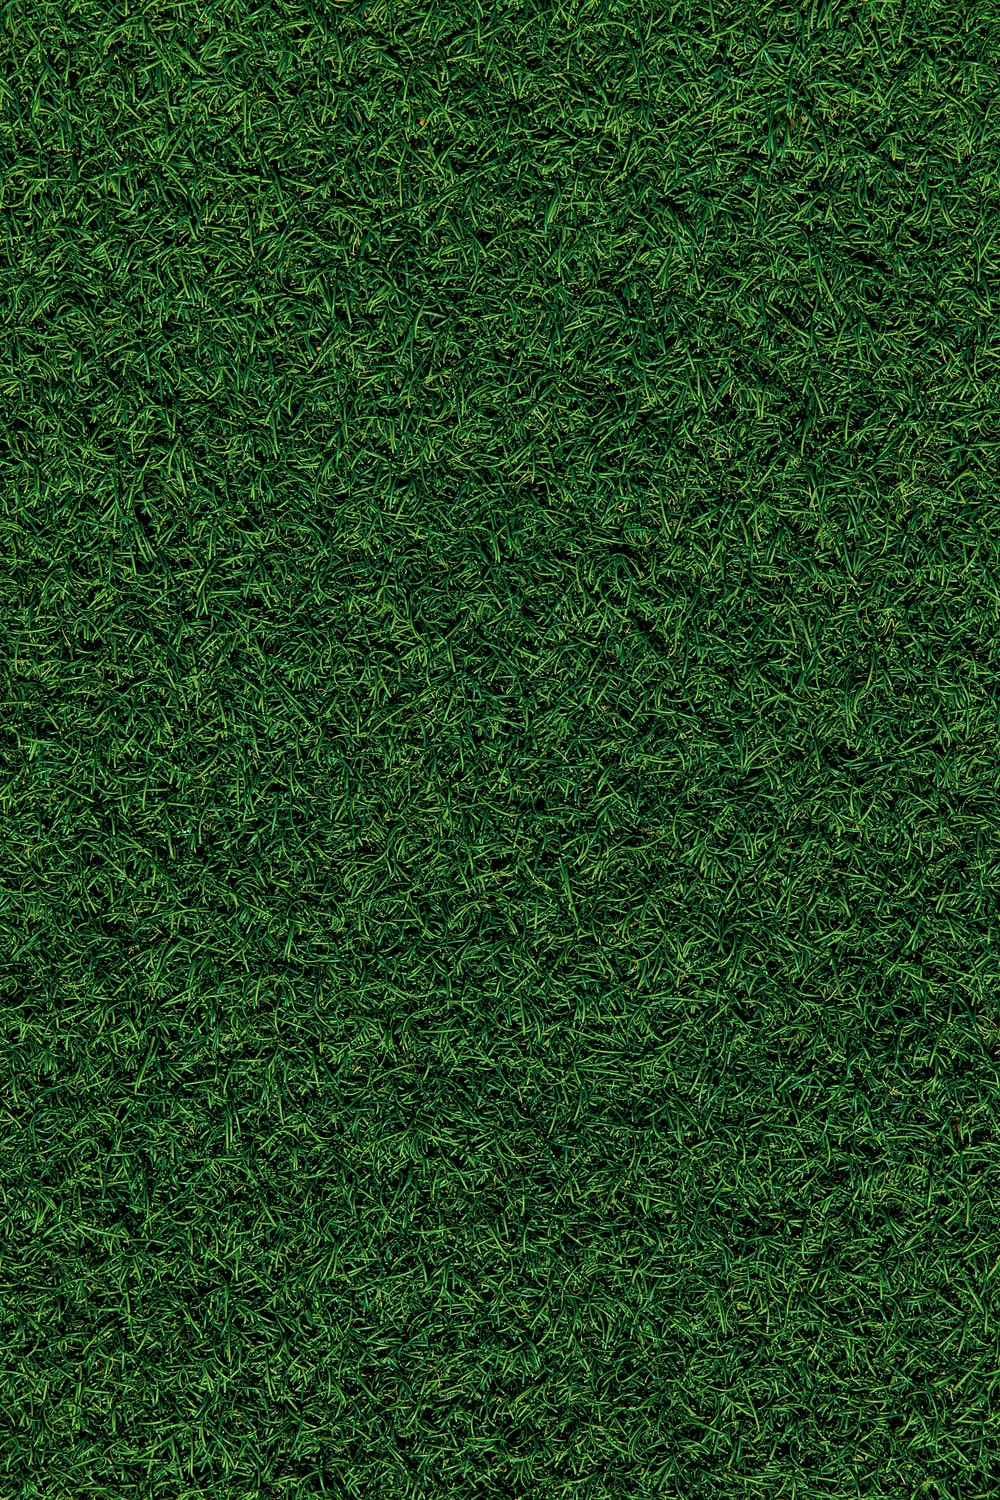 Green Texture Pictures Image